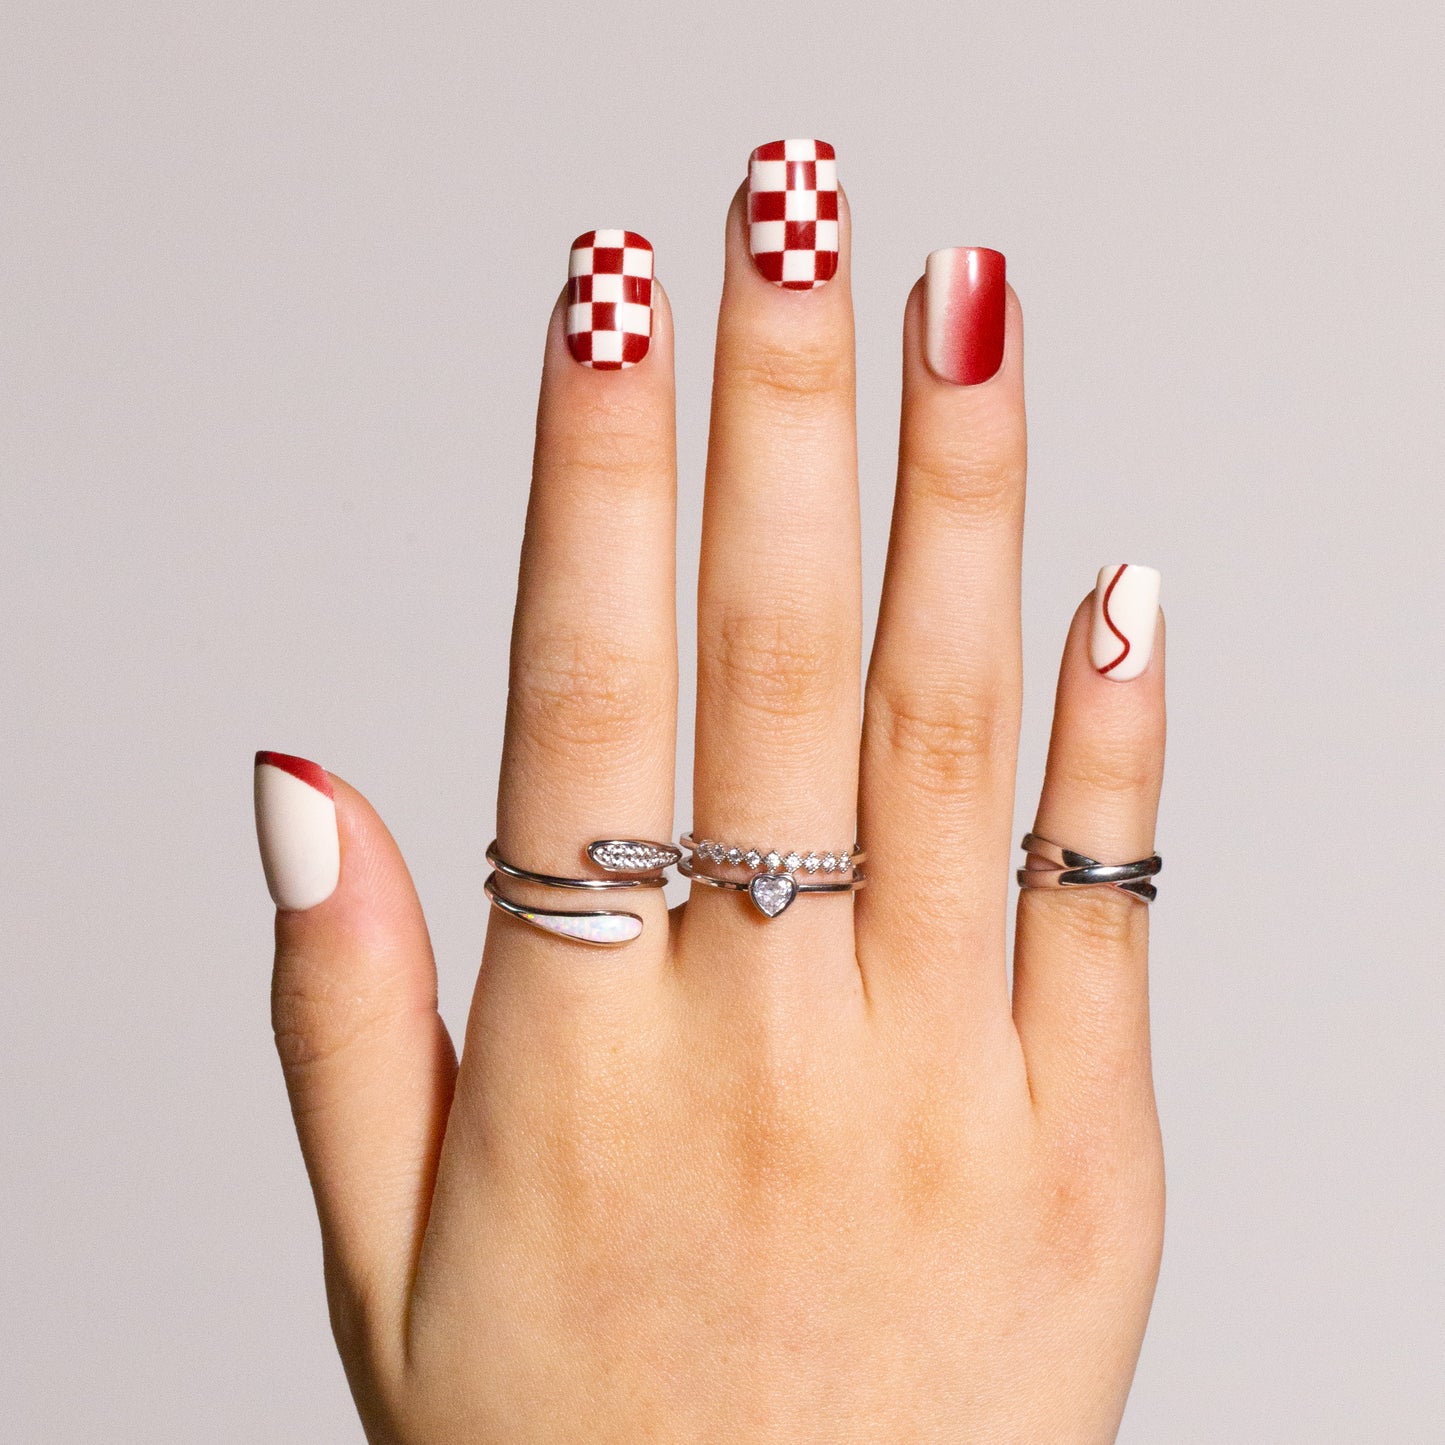 Press on Nails Squoval with Geometric Pattern and Red Strip Designs